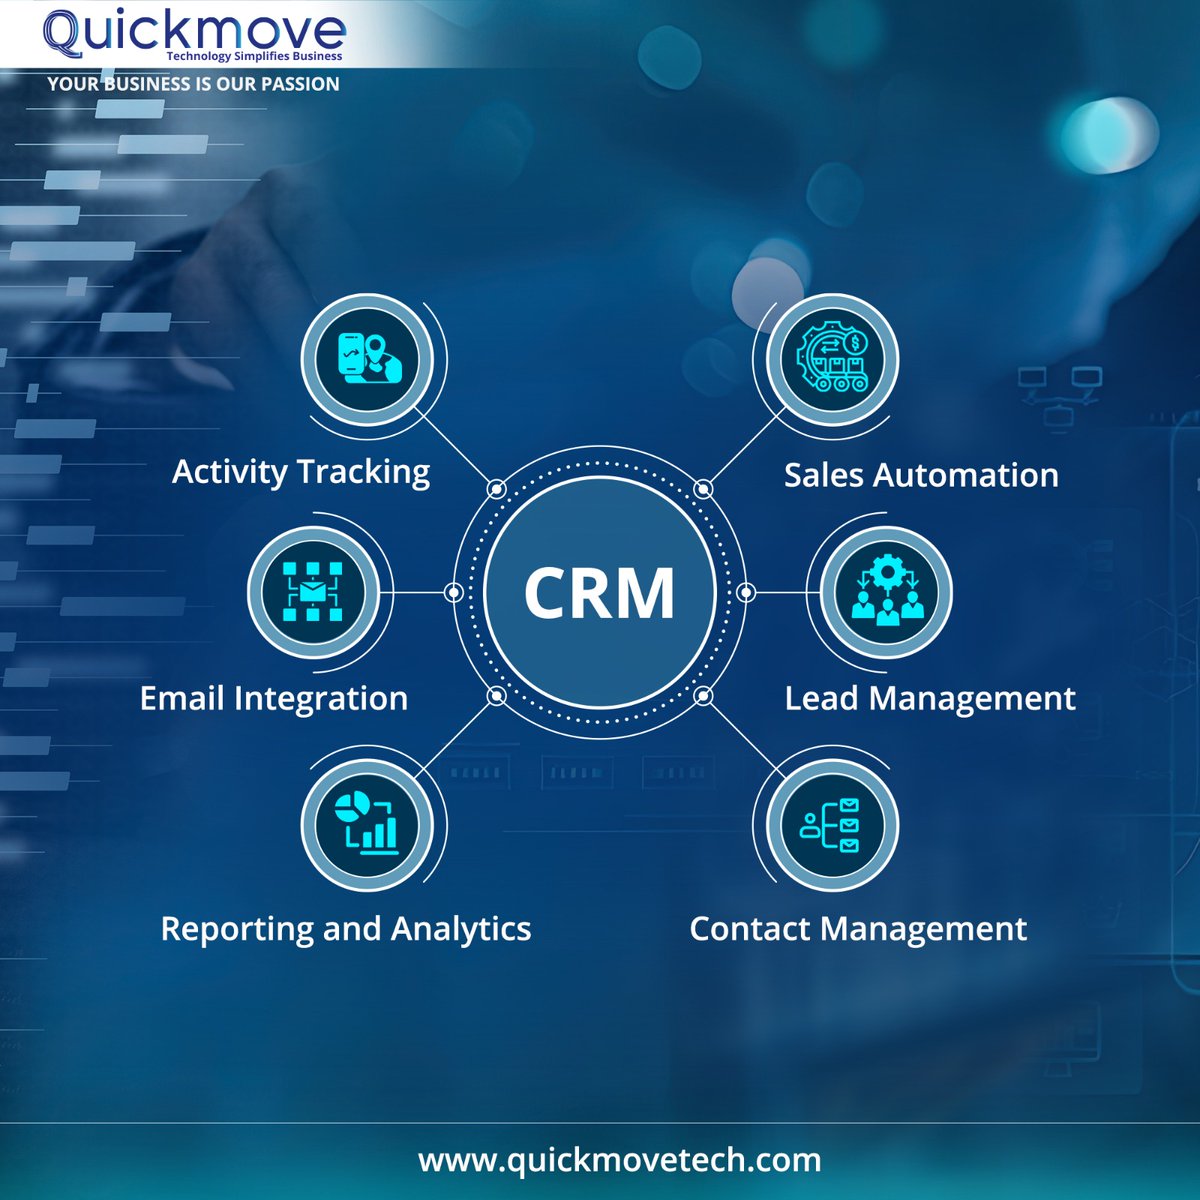 Transform your logistics business with our tailored CRM software! Streamline operations, optimize customer relationships, and drive growth like never before. 🚚✨  #LogisticsCRM #Efficiency #crm #CRMIntegration
#CRMPlatform #CRMSoftware #RelationshipManagement